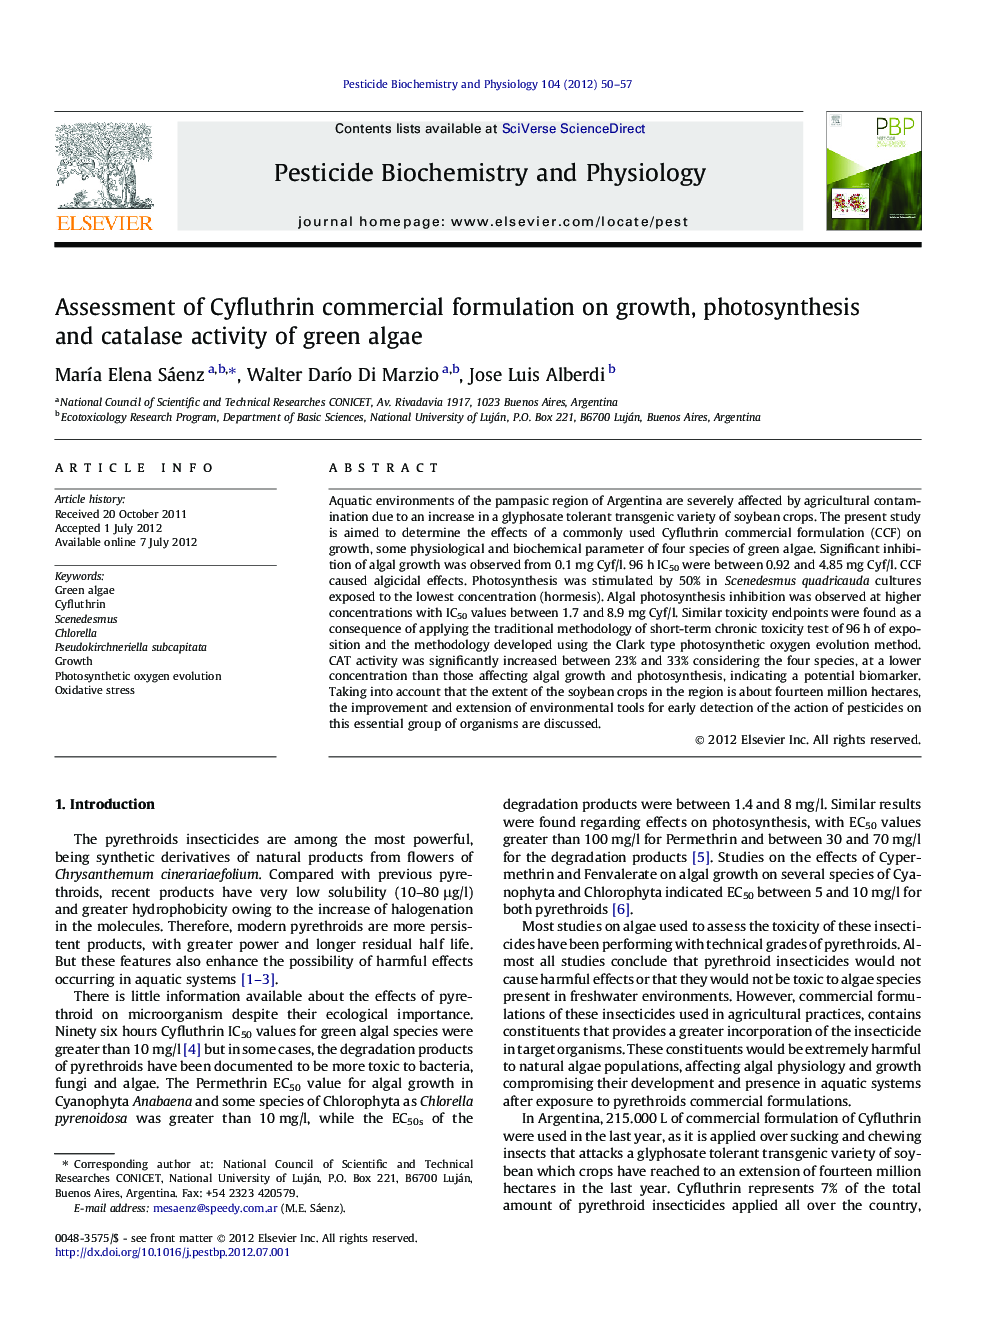 Assessment of Cyfluthrin commercial formulation on growth, photosynthesis and catalase activity of green algae